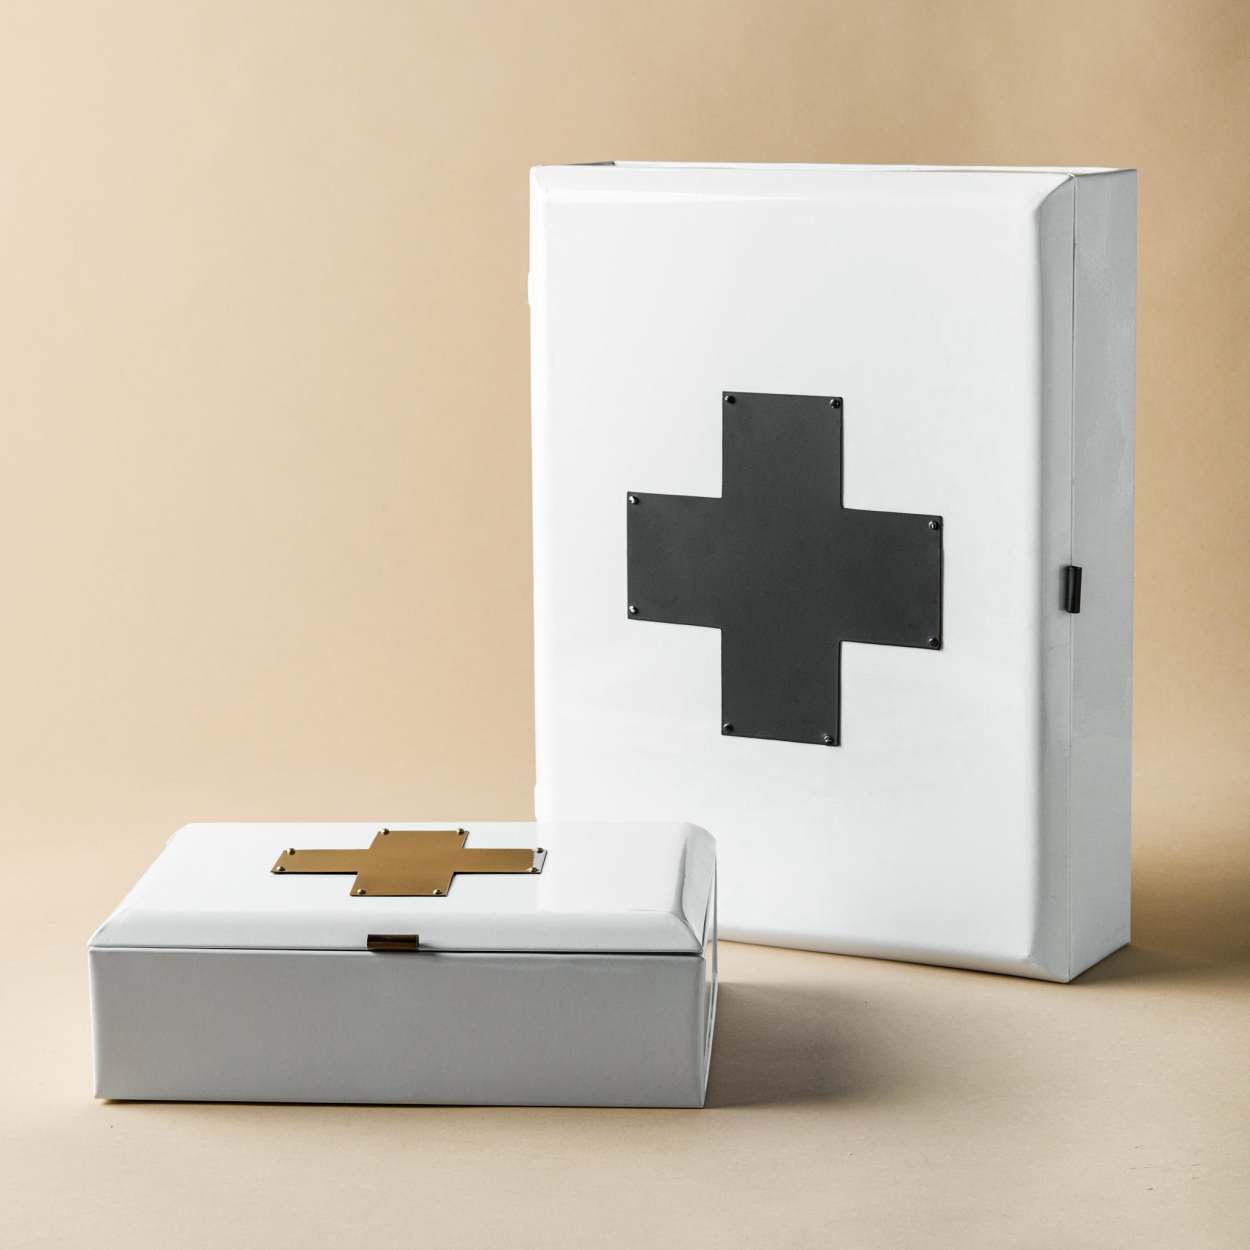 Brass and White First Aid Kit - Magnolia